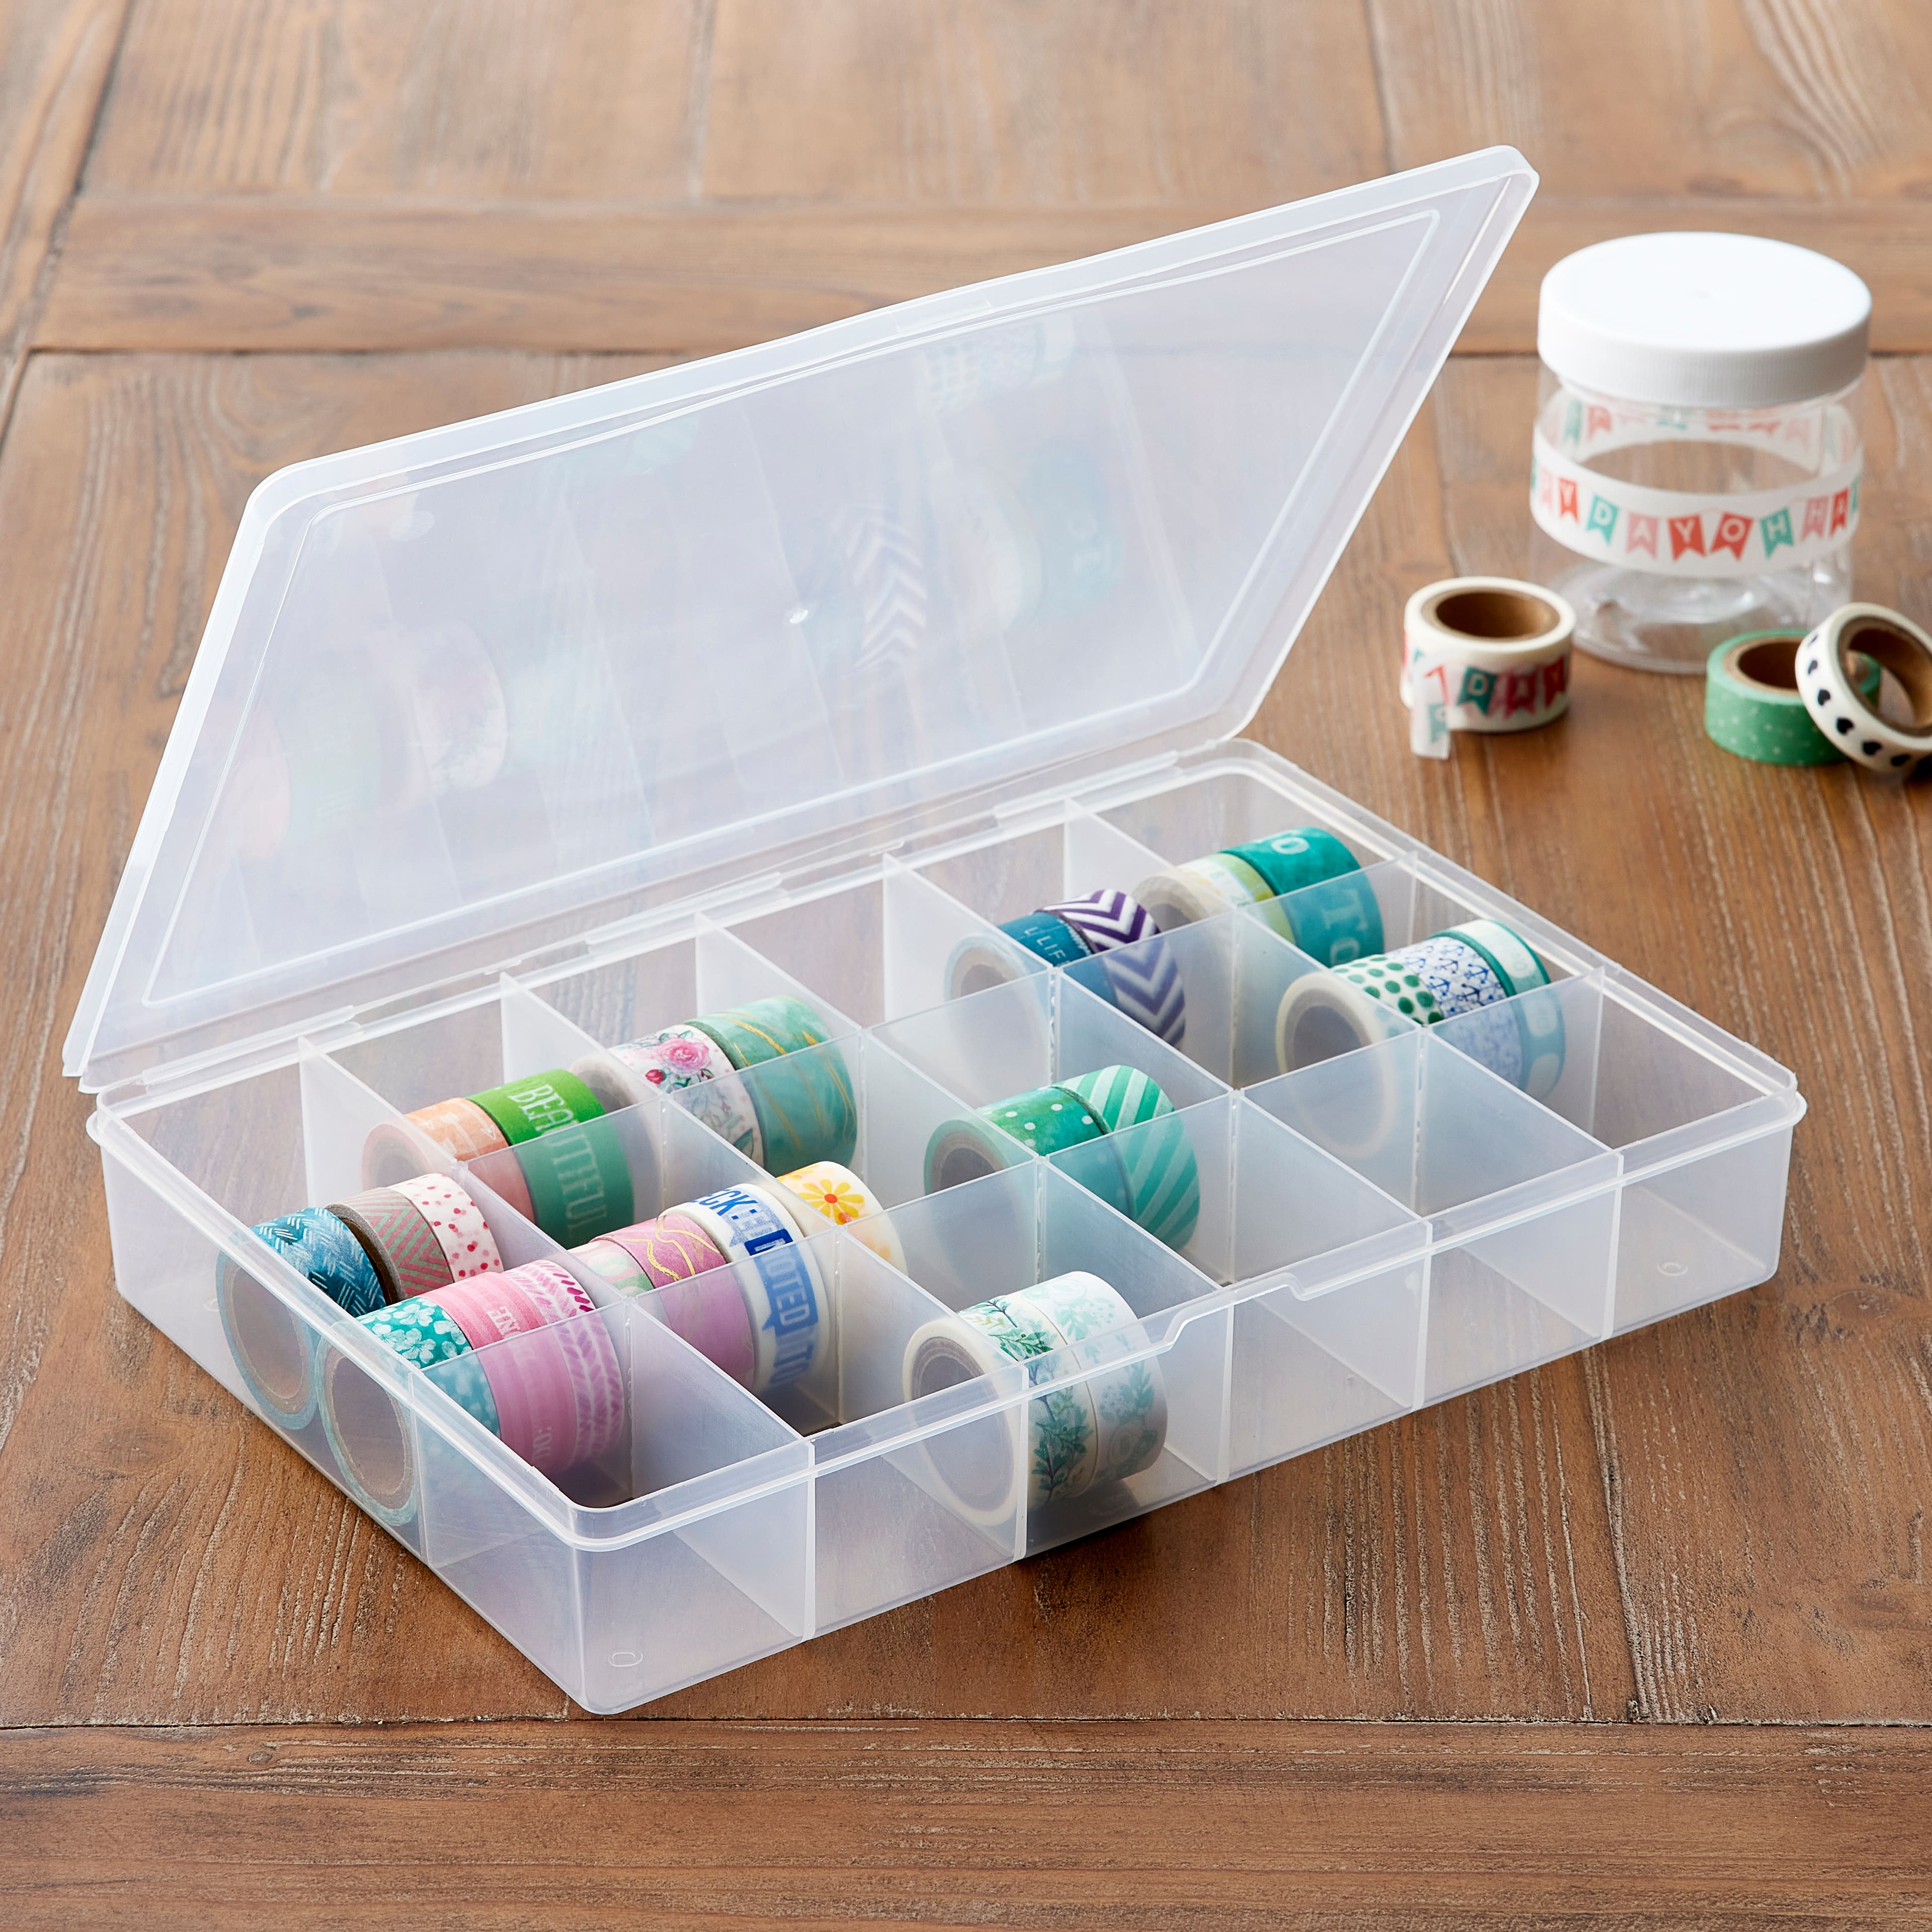 BEAD STORAGE SOLUTIONS 45-Pieces Craft Organizer and 82-Pieces Tiny  Supplies Organizer BSS-0510 + BSS-0511 - The Home Depot